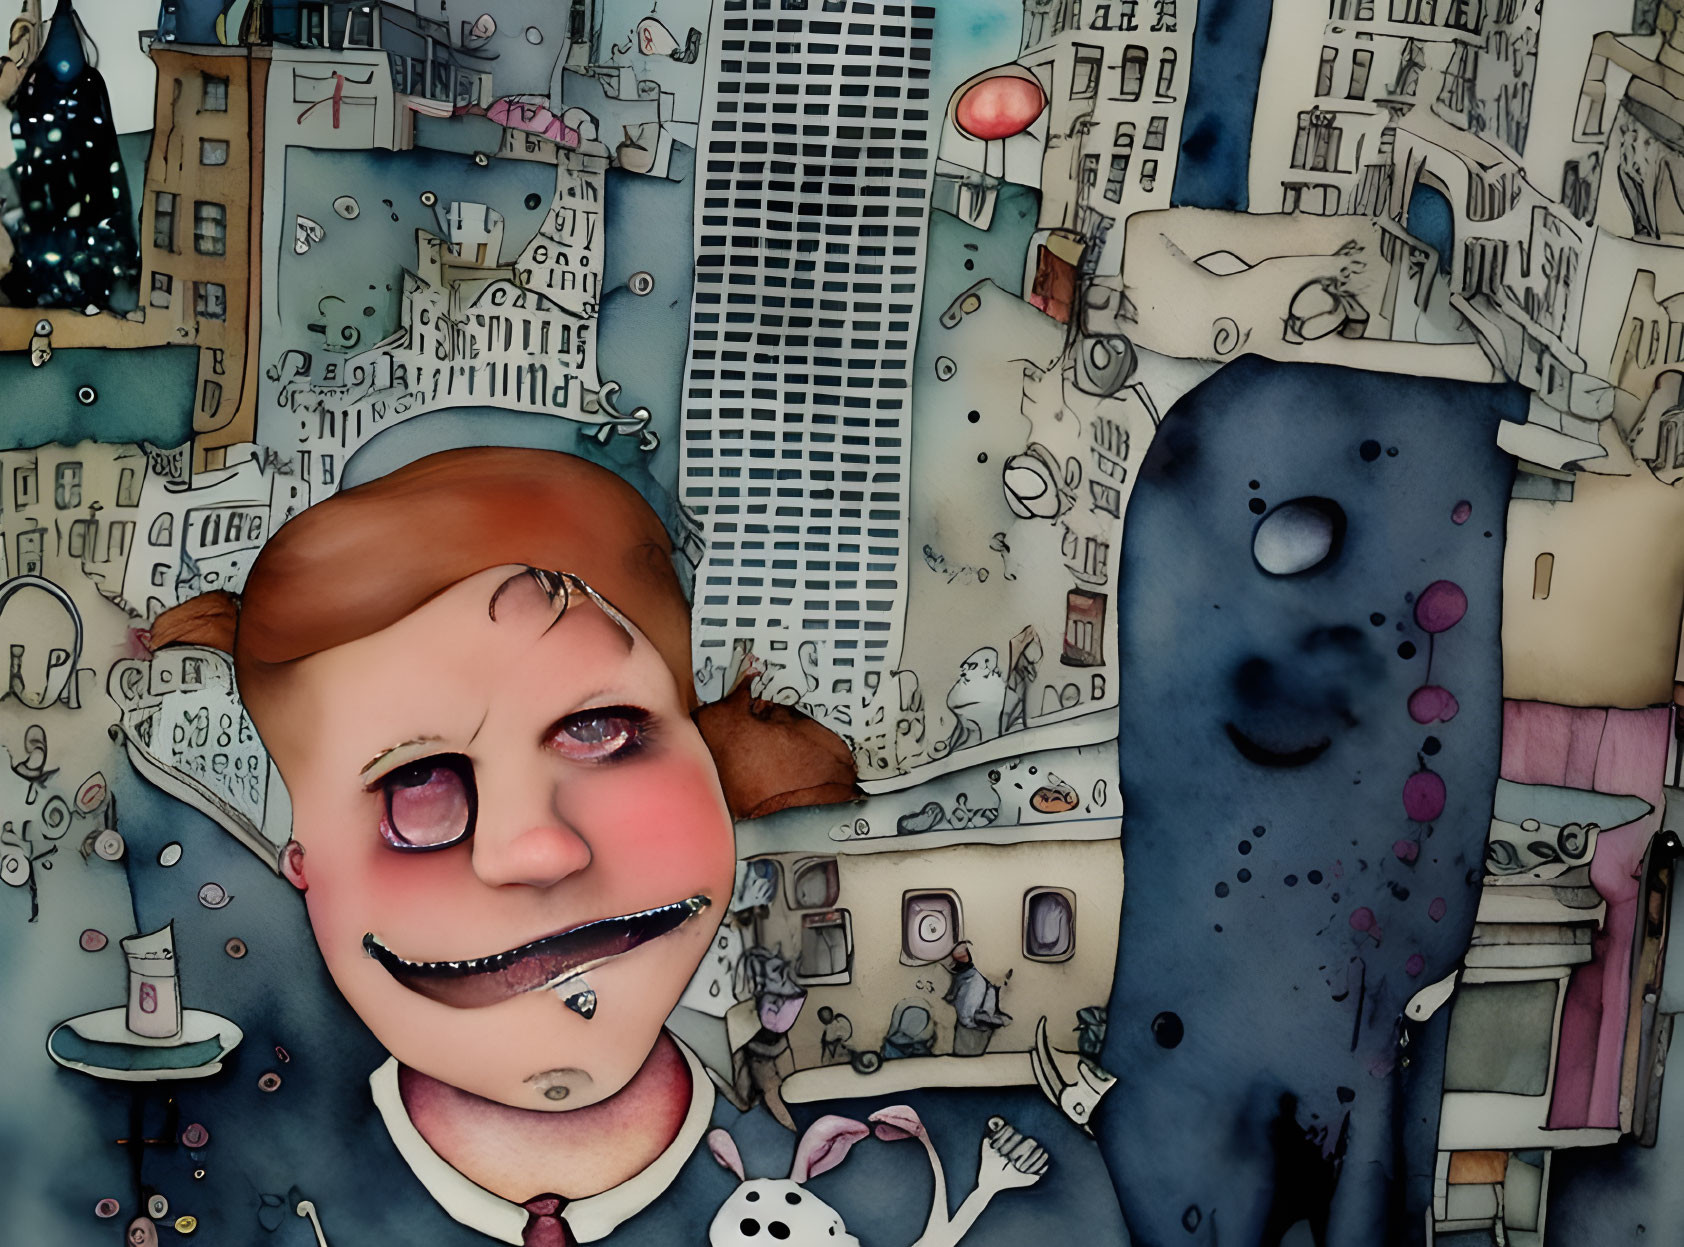 Whimsical illustration of a grinning character in chaotic cityscape